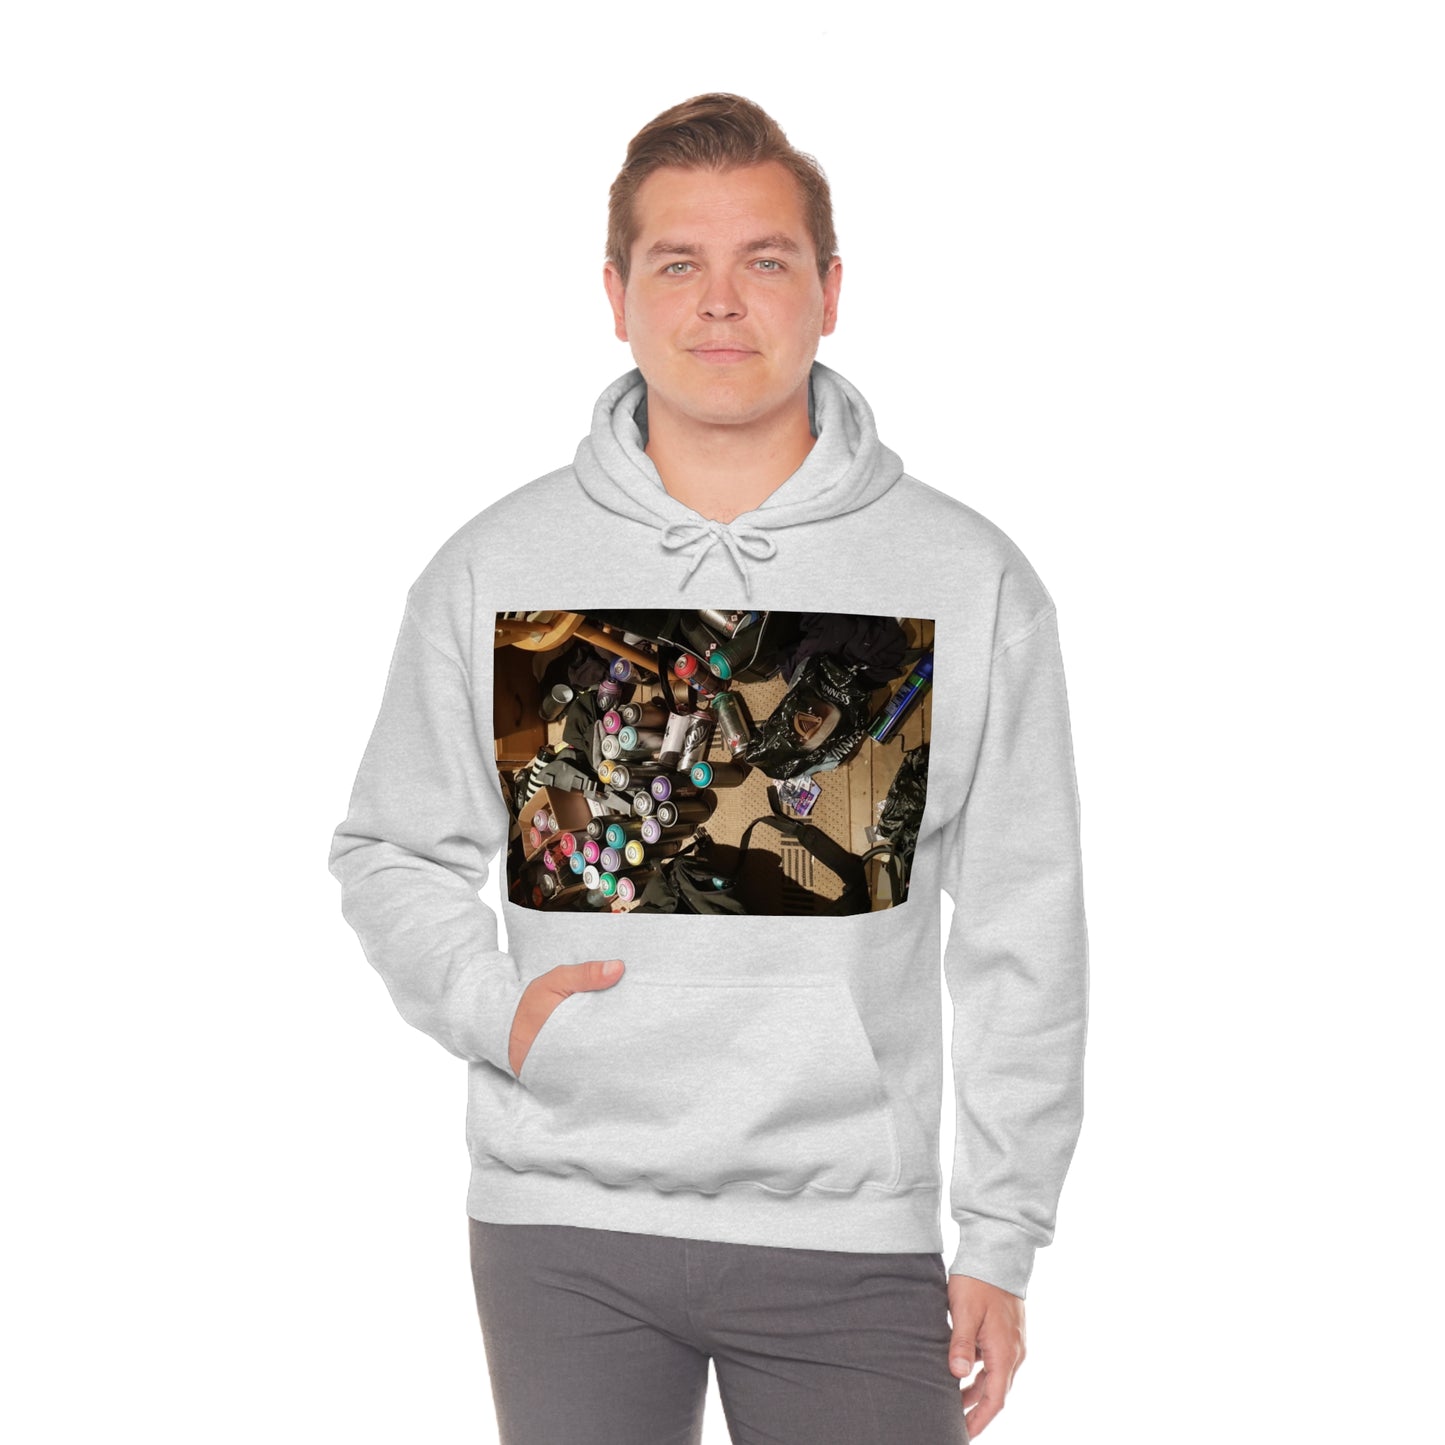 Late night antics hoody(Images switched)